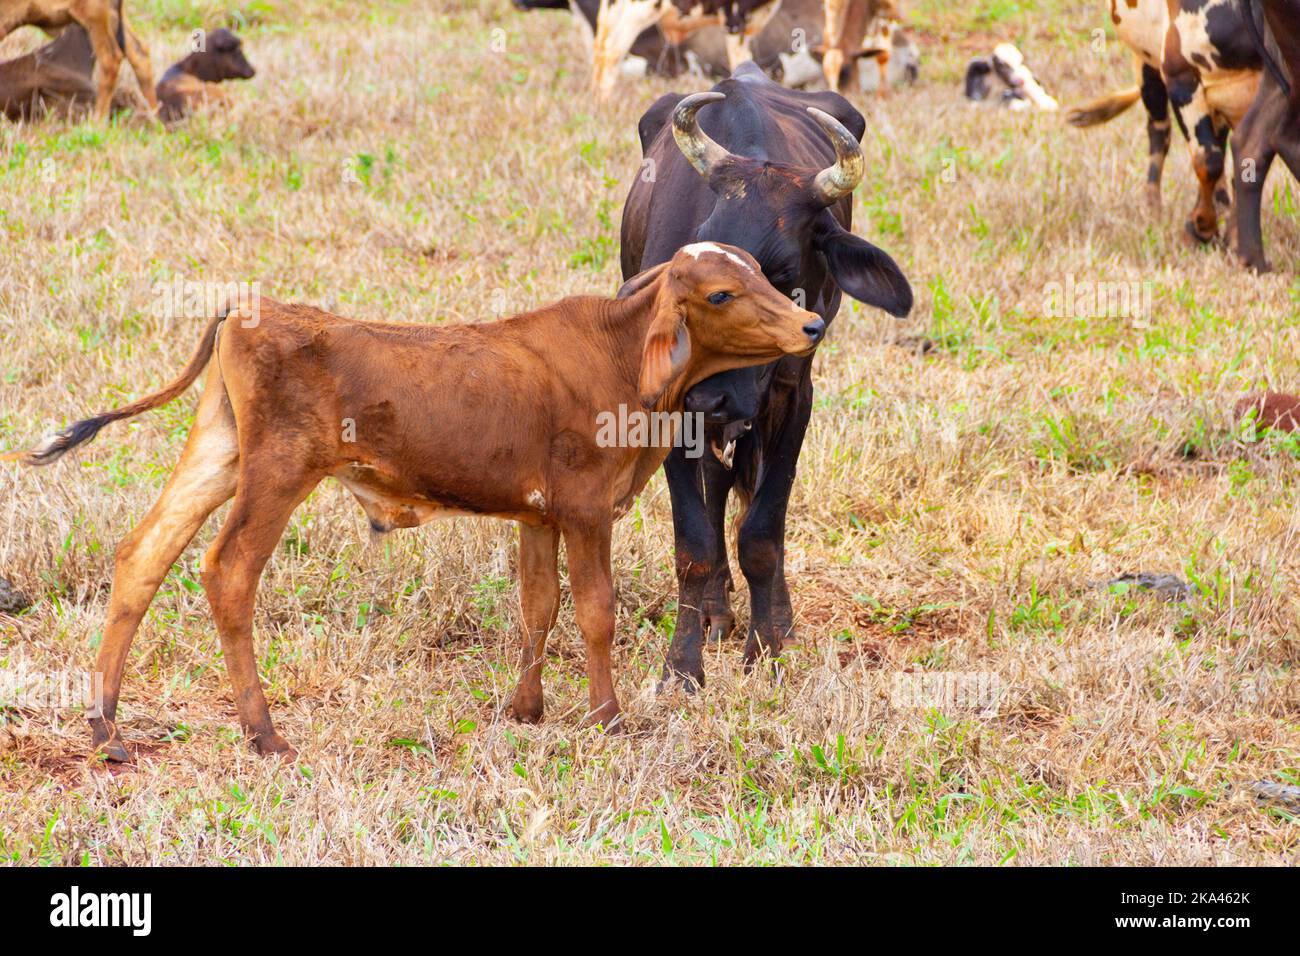 Goiânia, Goias, Brazil – October 30, 2022: A black cow, along with her brown calf, in the pasture with other animals in the background. Stock Photo